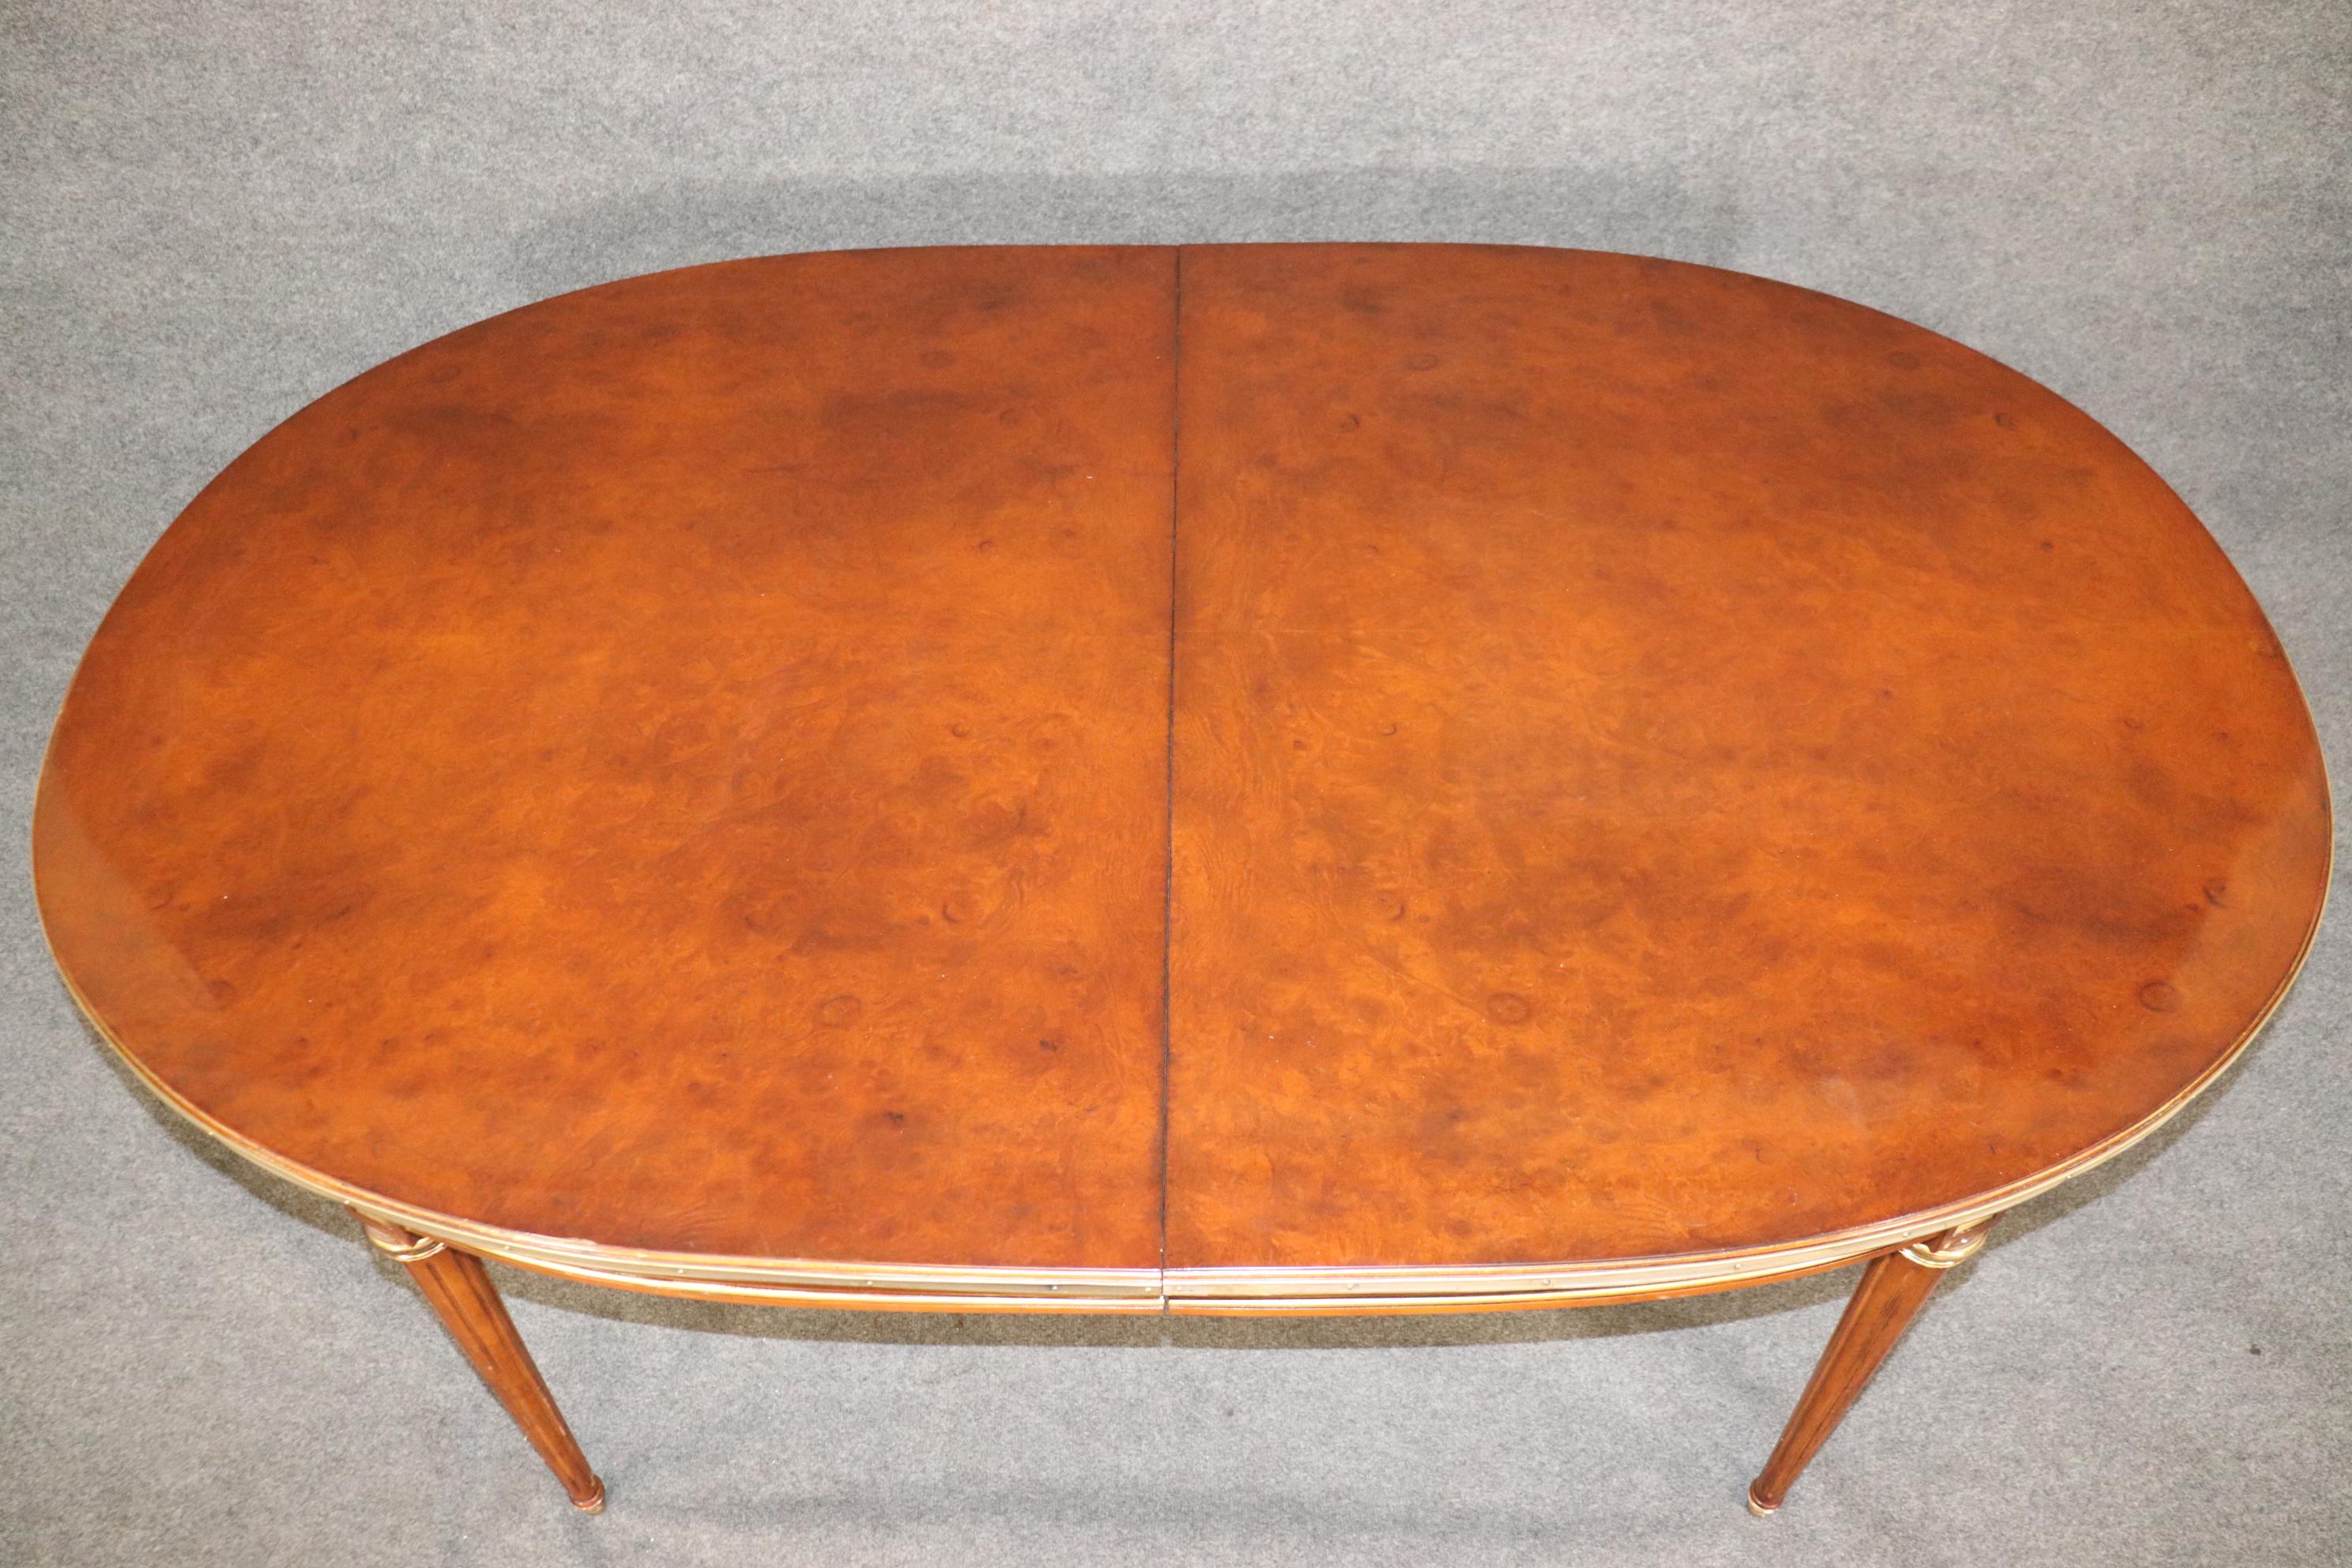 This is a fantasic burled walnut dining table with rich amber coloration and gorgeous brass and bronze trim everywhere on the table frame. The table has a wonderful original finish and no major issues more than minor signs of wear and use but